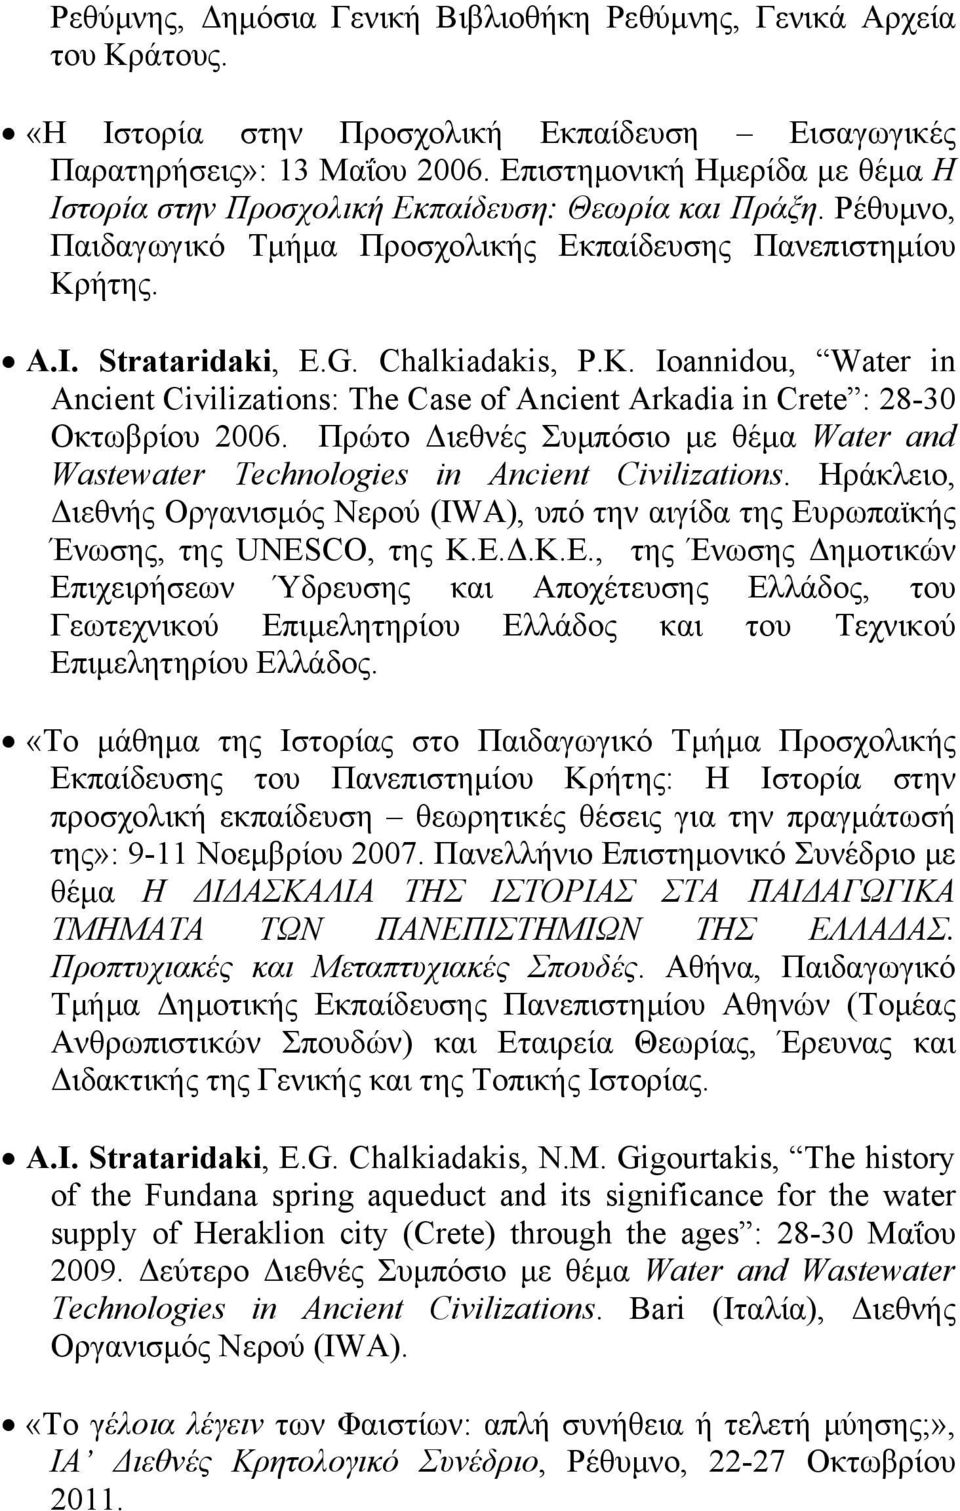 Ioannidou, Water in Ancient Civilizations: The Case of Αncient Arkadia in Crete : 28-30 Οκτωβρίου 2006. Πρώτο Διεθνές Συμπόσιο με θέμα Water and Wastewater Technologies in Ancient Civilizations.